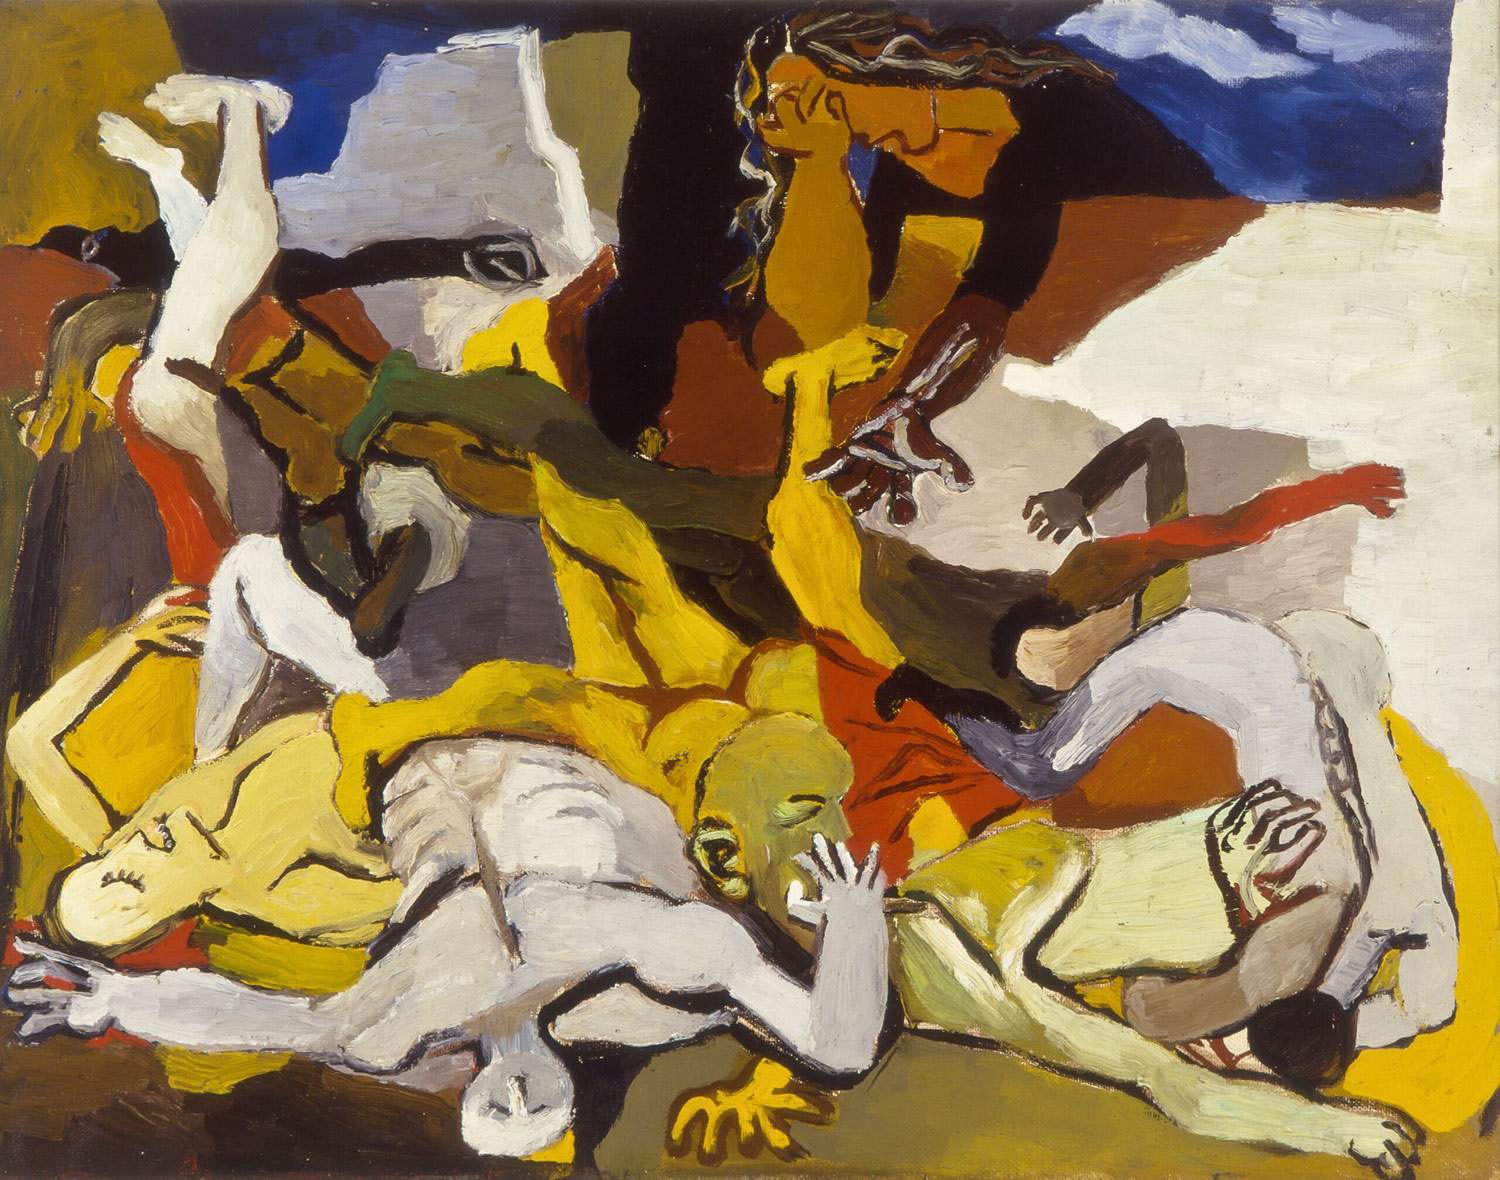 In Sicily an exhibition dedicated to the masters of the 20th century from Guttuso to Vedova